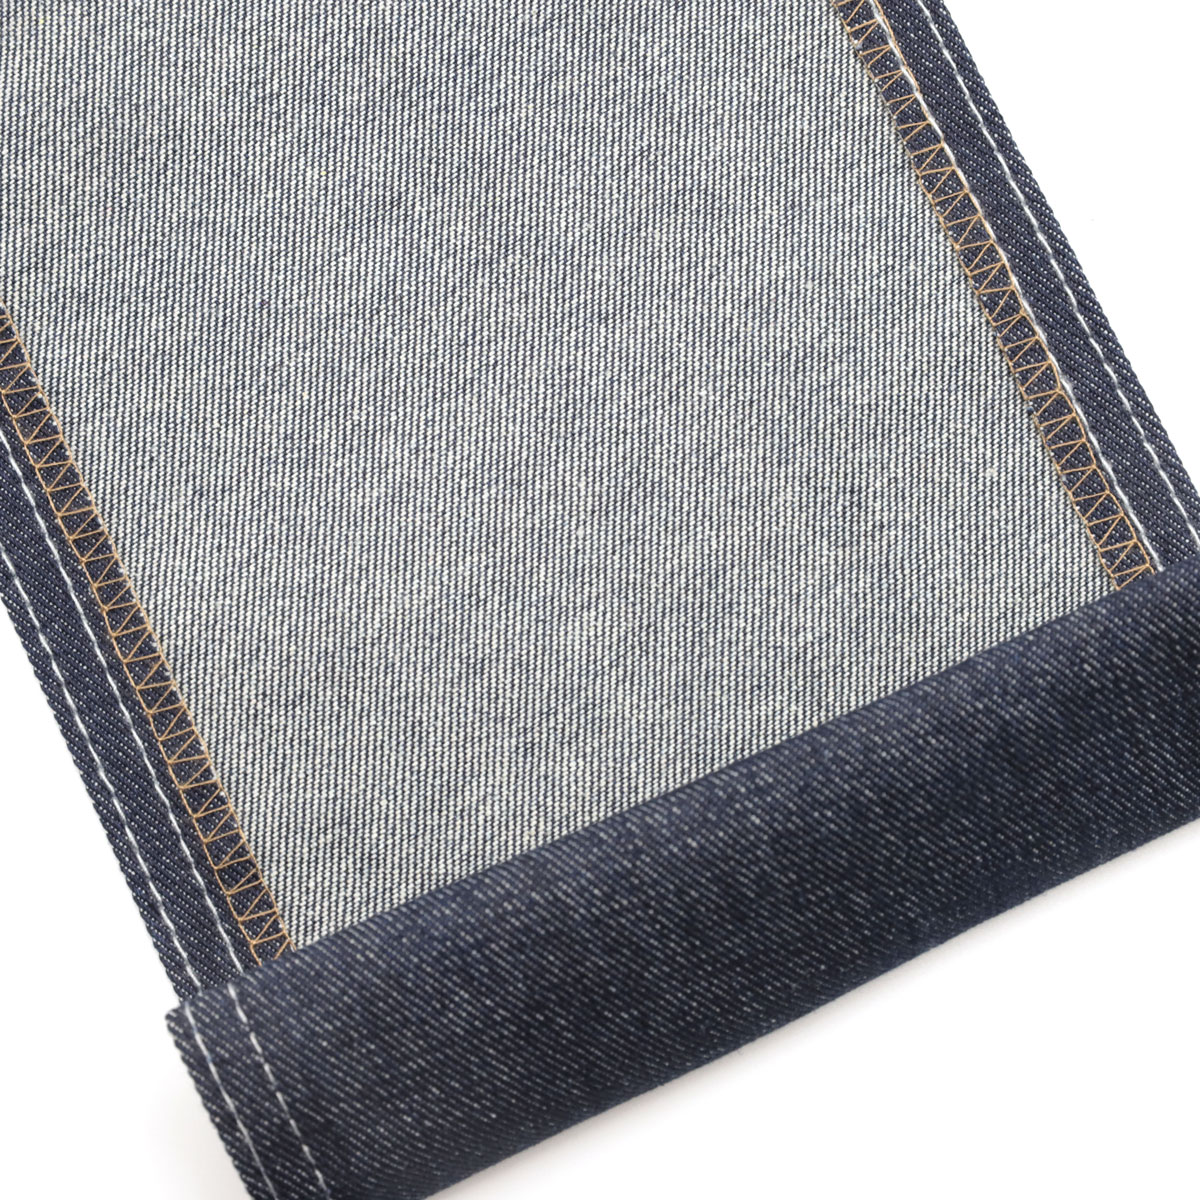 What Are the Top Factors Affecting of Twill Denim Fabric? 1